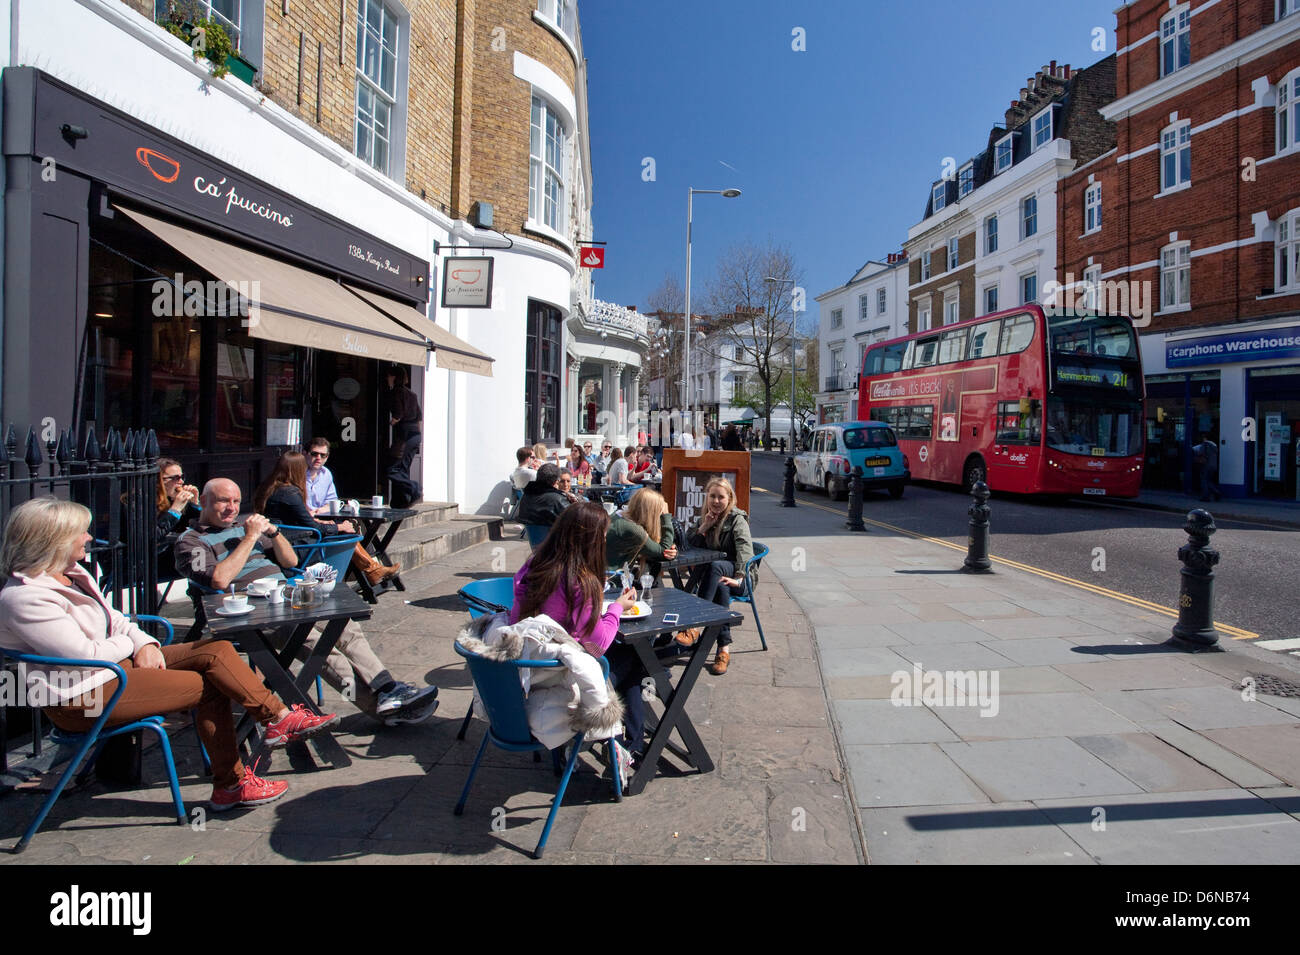 Pavement cafe in King's Road, Chelsea, London Stock Photo